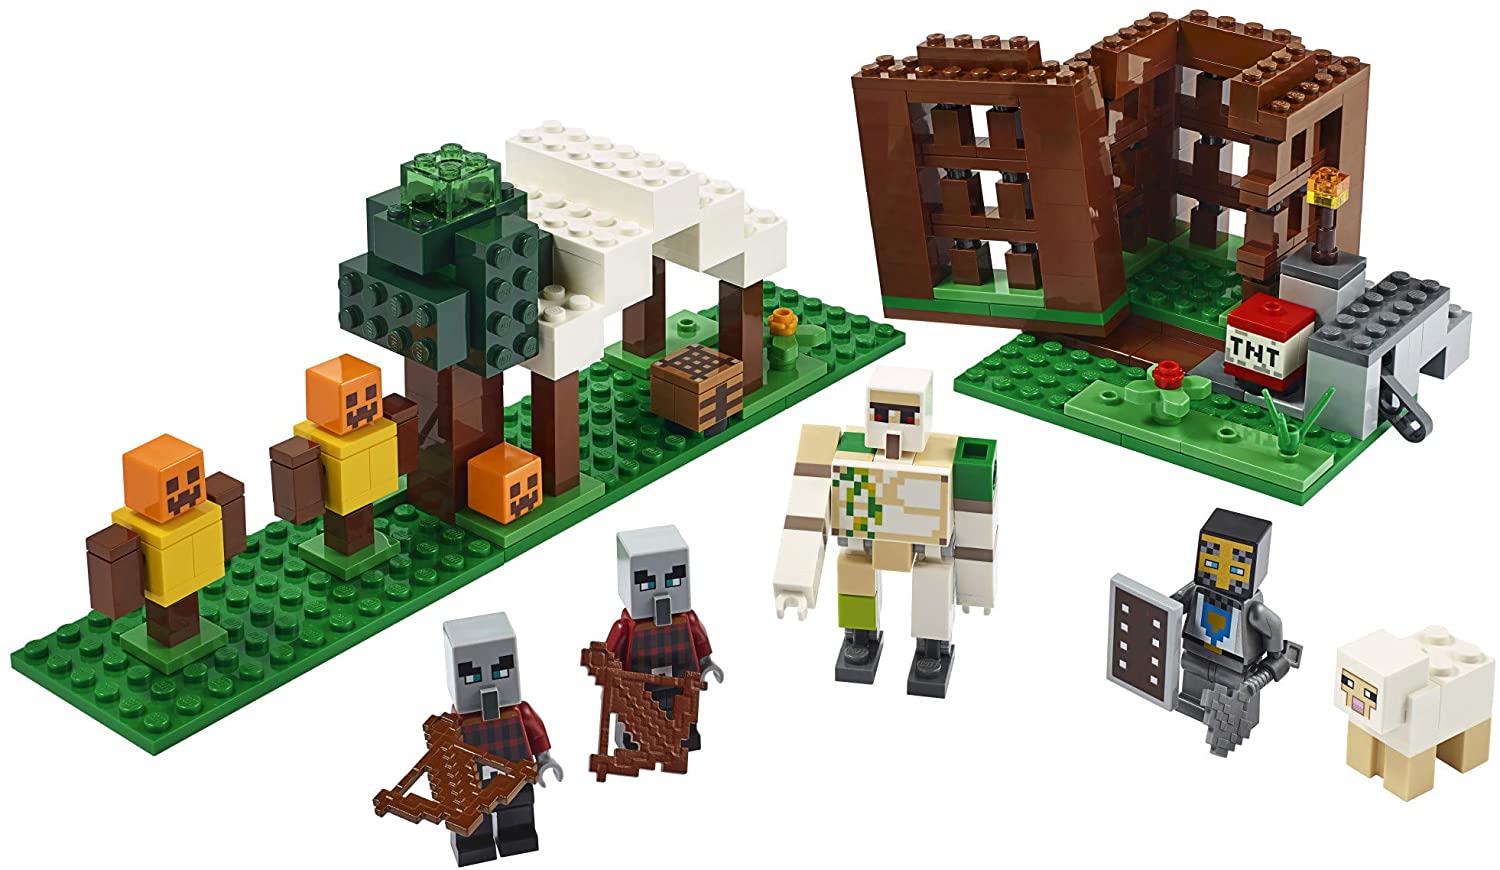 Lego Minecraft the Pillager Outpost - Lego 21159